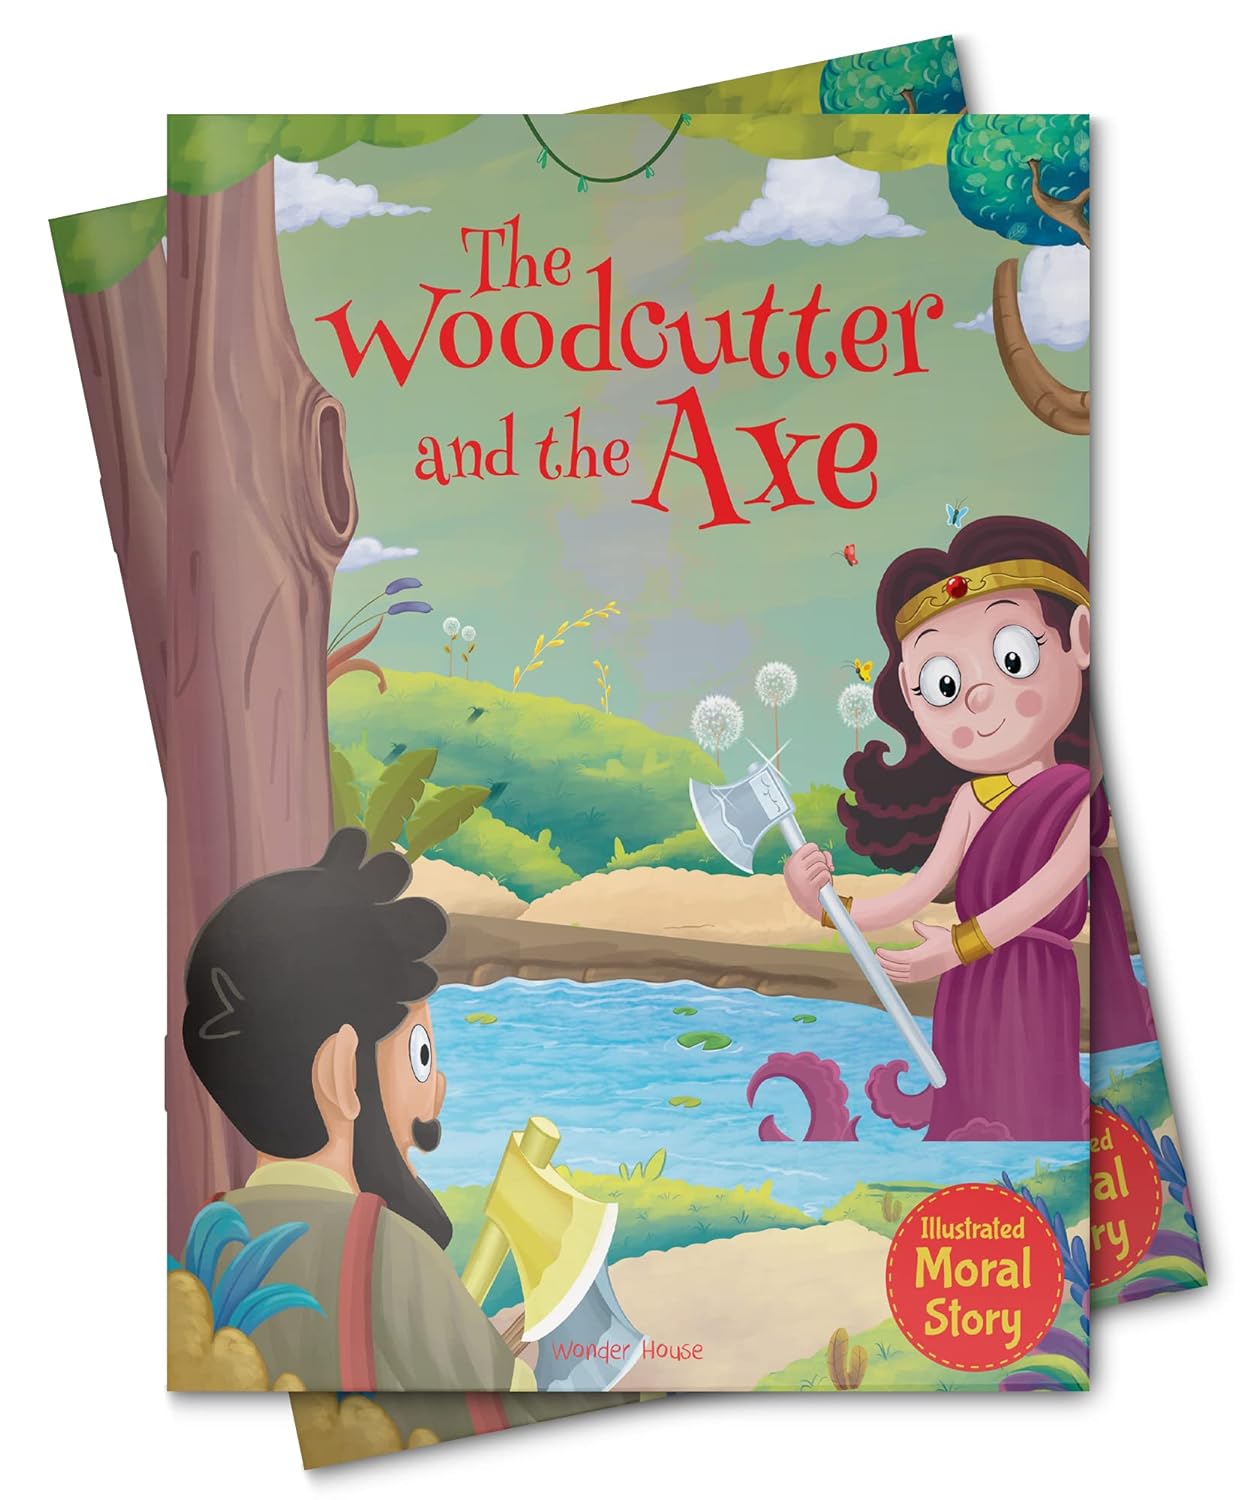 The Woodcutter and the Axe - Illustrated Moral Story for Children